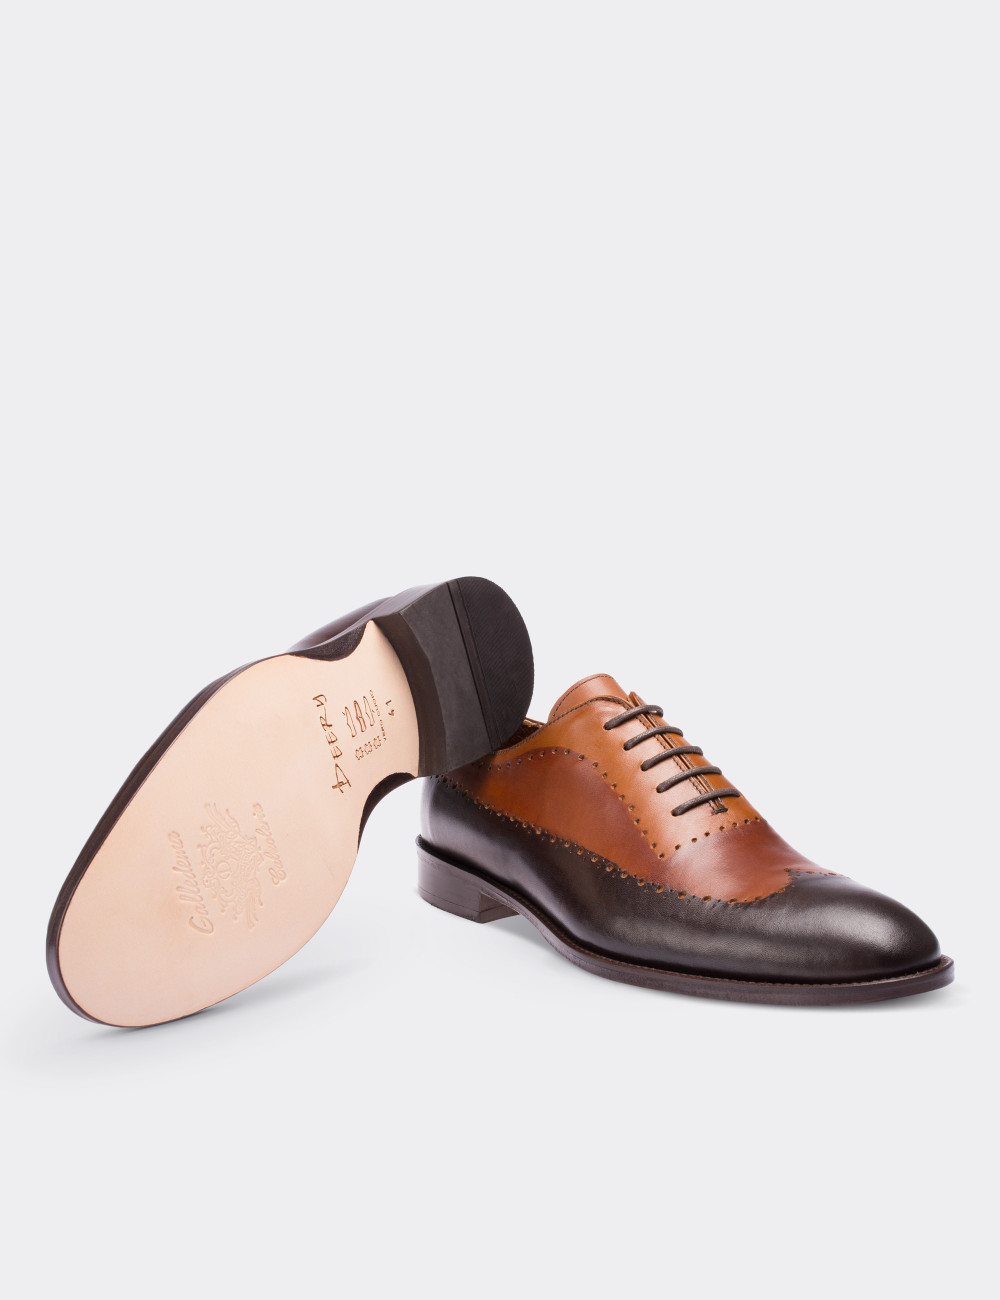 Brown  Leather Classic Shoes - 01615MKHVK01